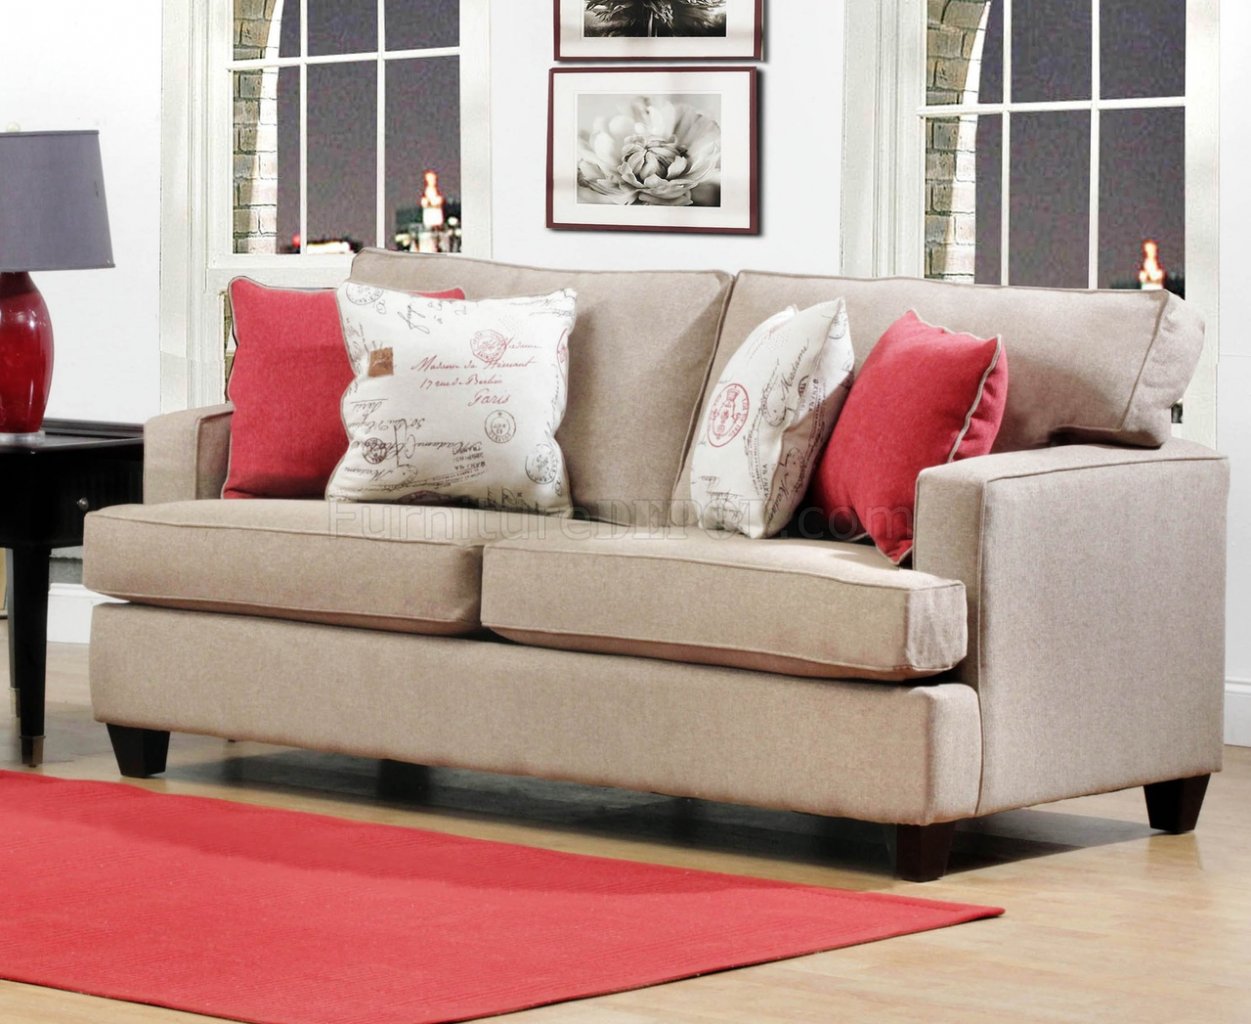 152769 Boulder Sofa in Unique Bisque Fabric by Chelsea